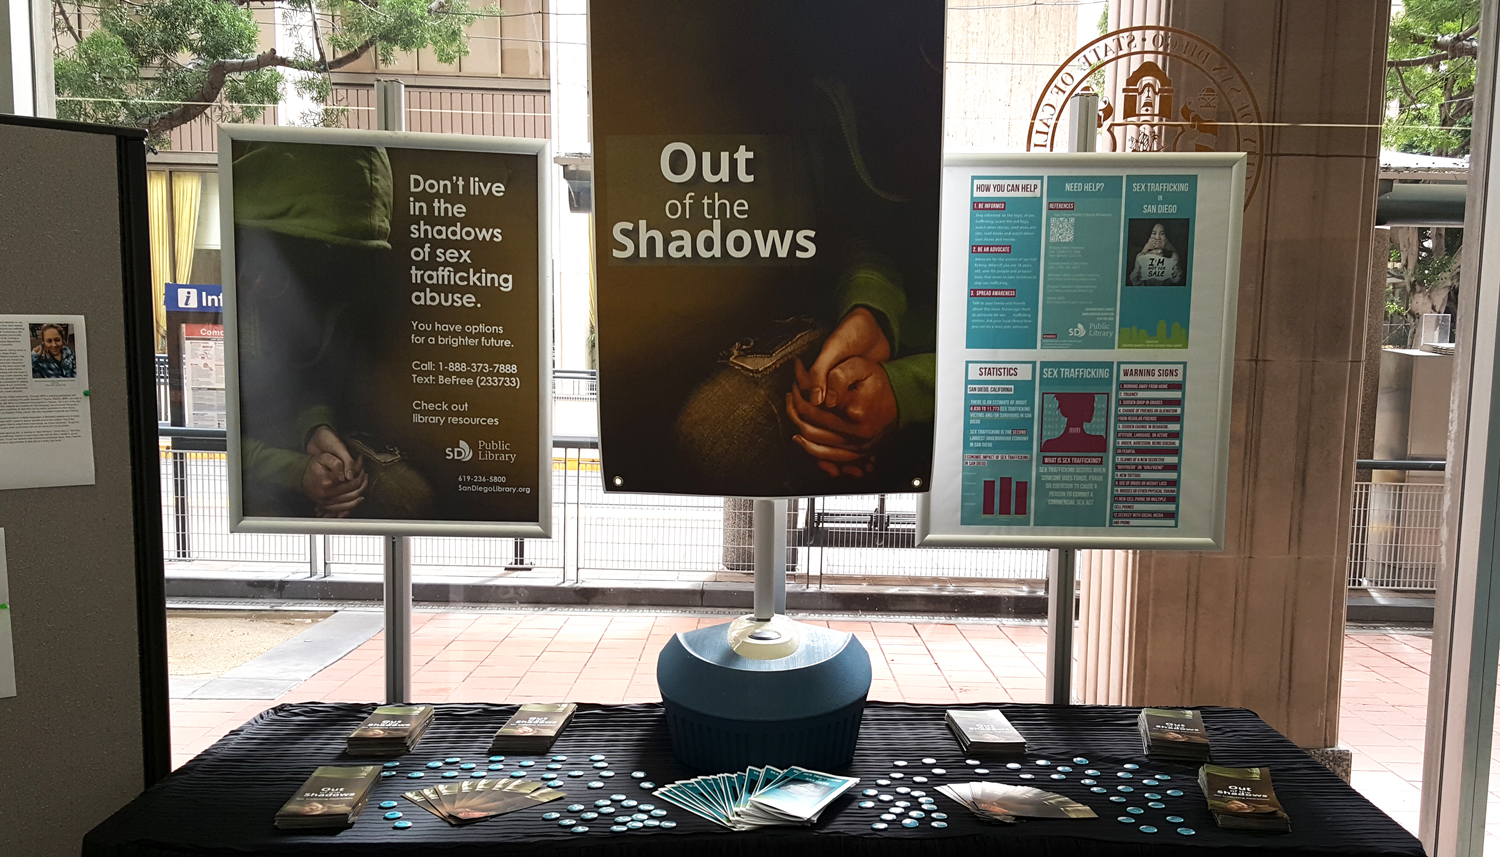 Photo of the Out of the Shadows display at City Hall.